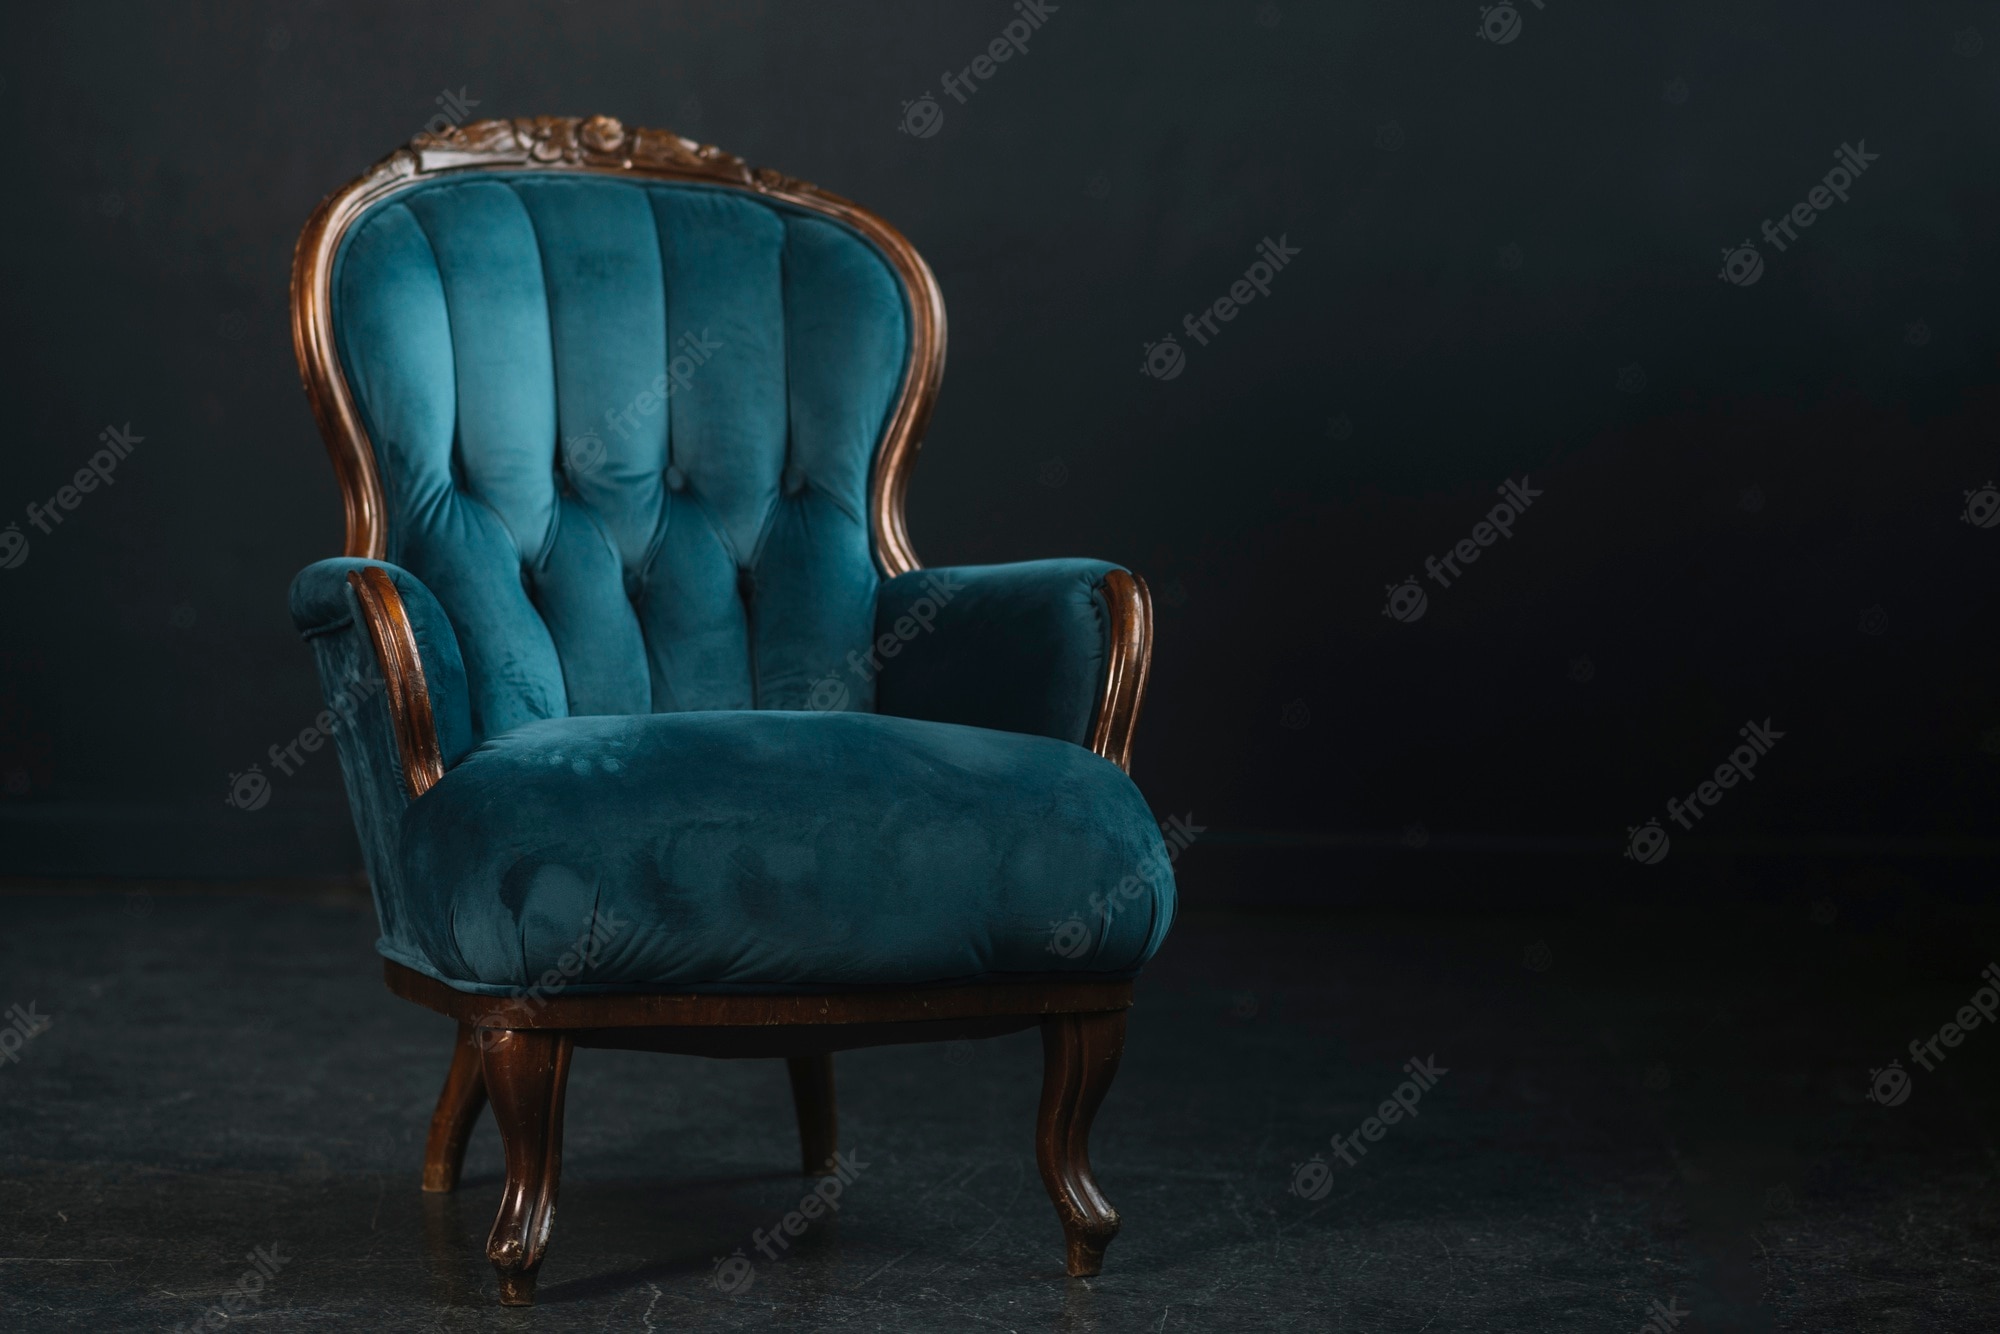 Background Chair